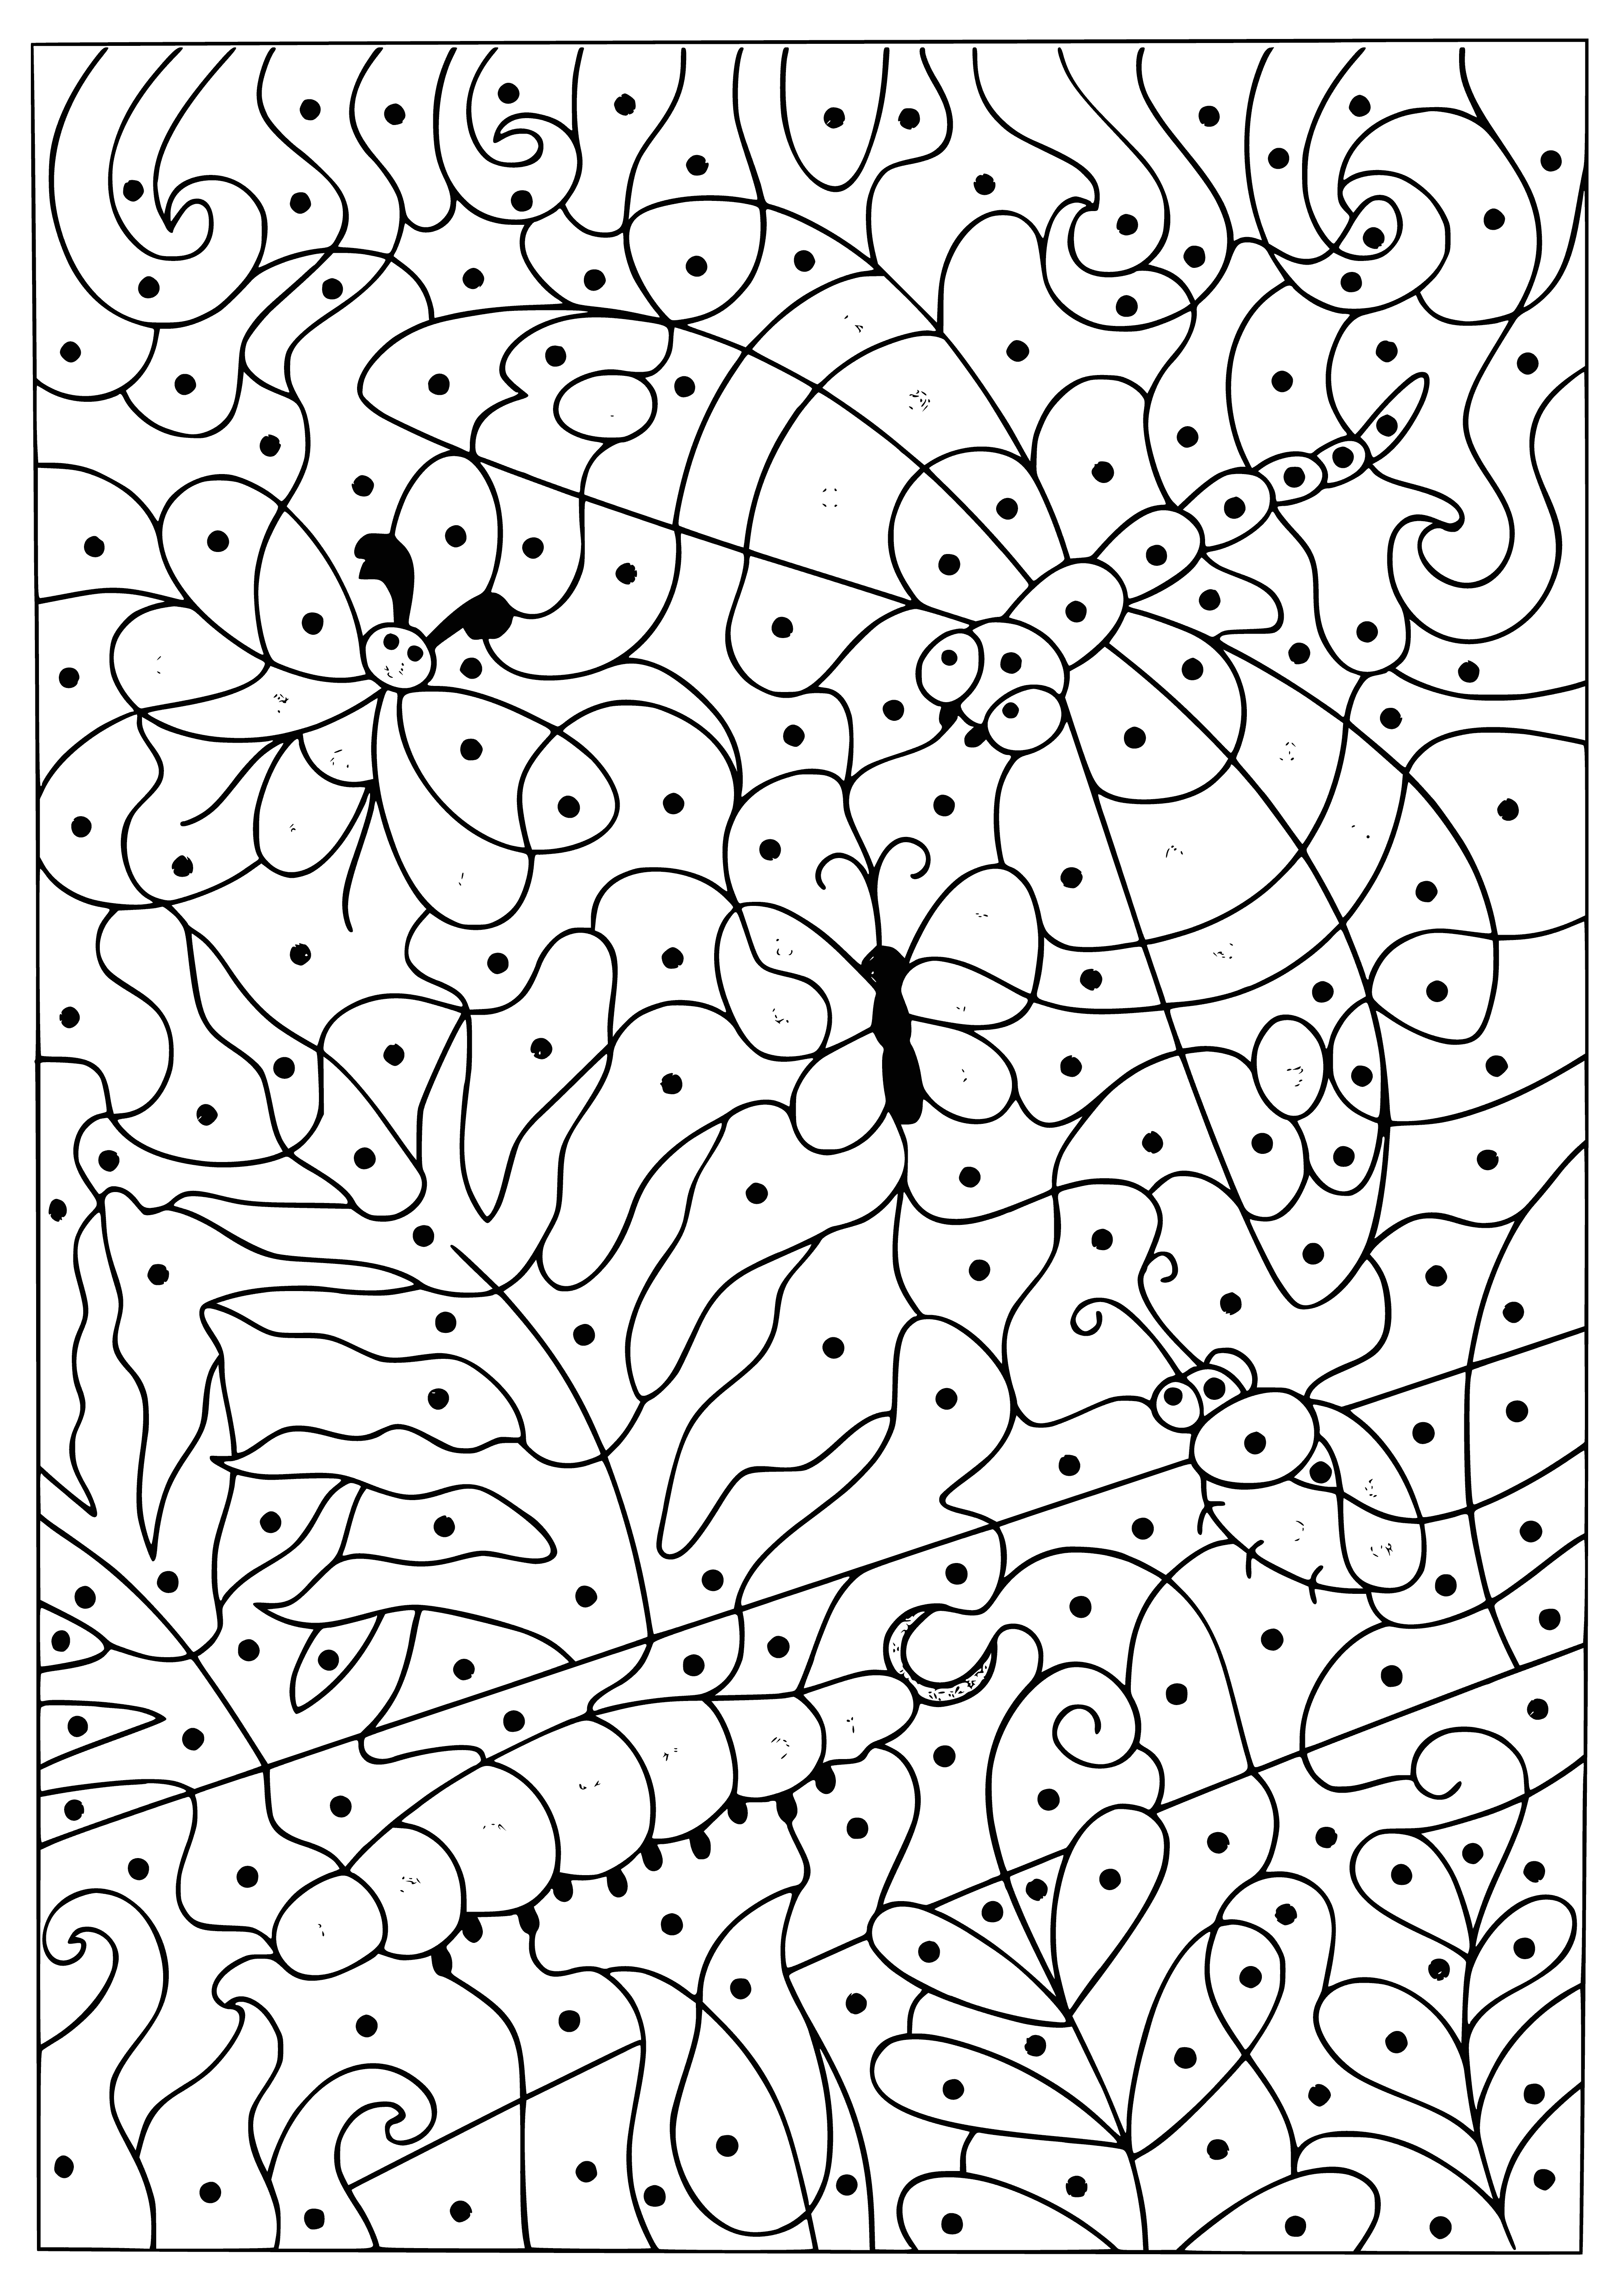 coloring page: Caterpillar, leaves, tree trunk & two birds w/colo'd beaks, white bunny w/black nose, eyes sits in front - a green & colorful scene!